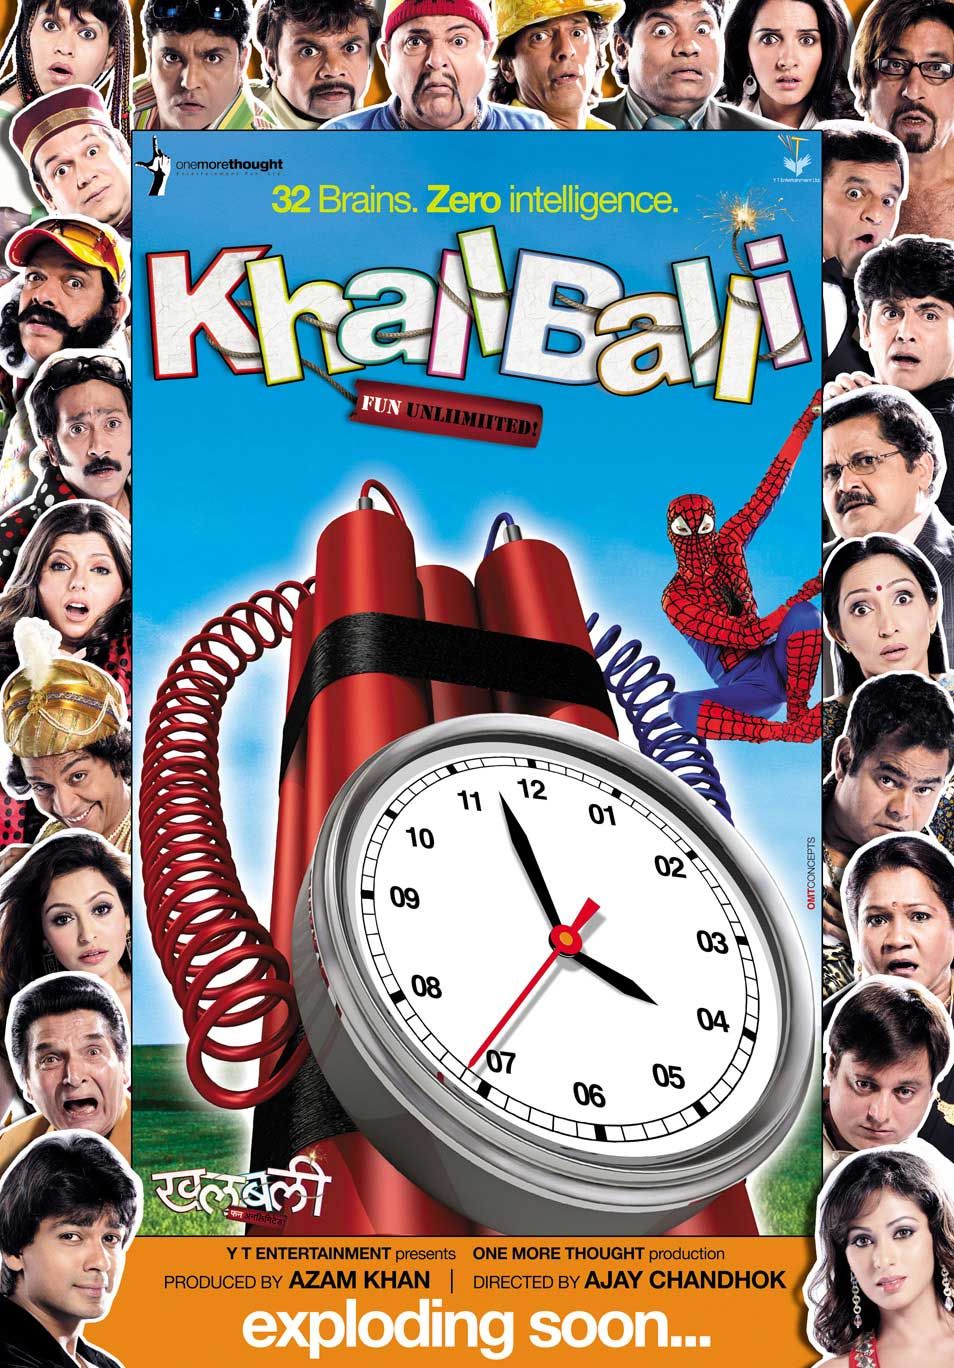 Extra Large Movie Poster Image for Khallballi: Fun Unlimited (#2 of 10)